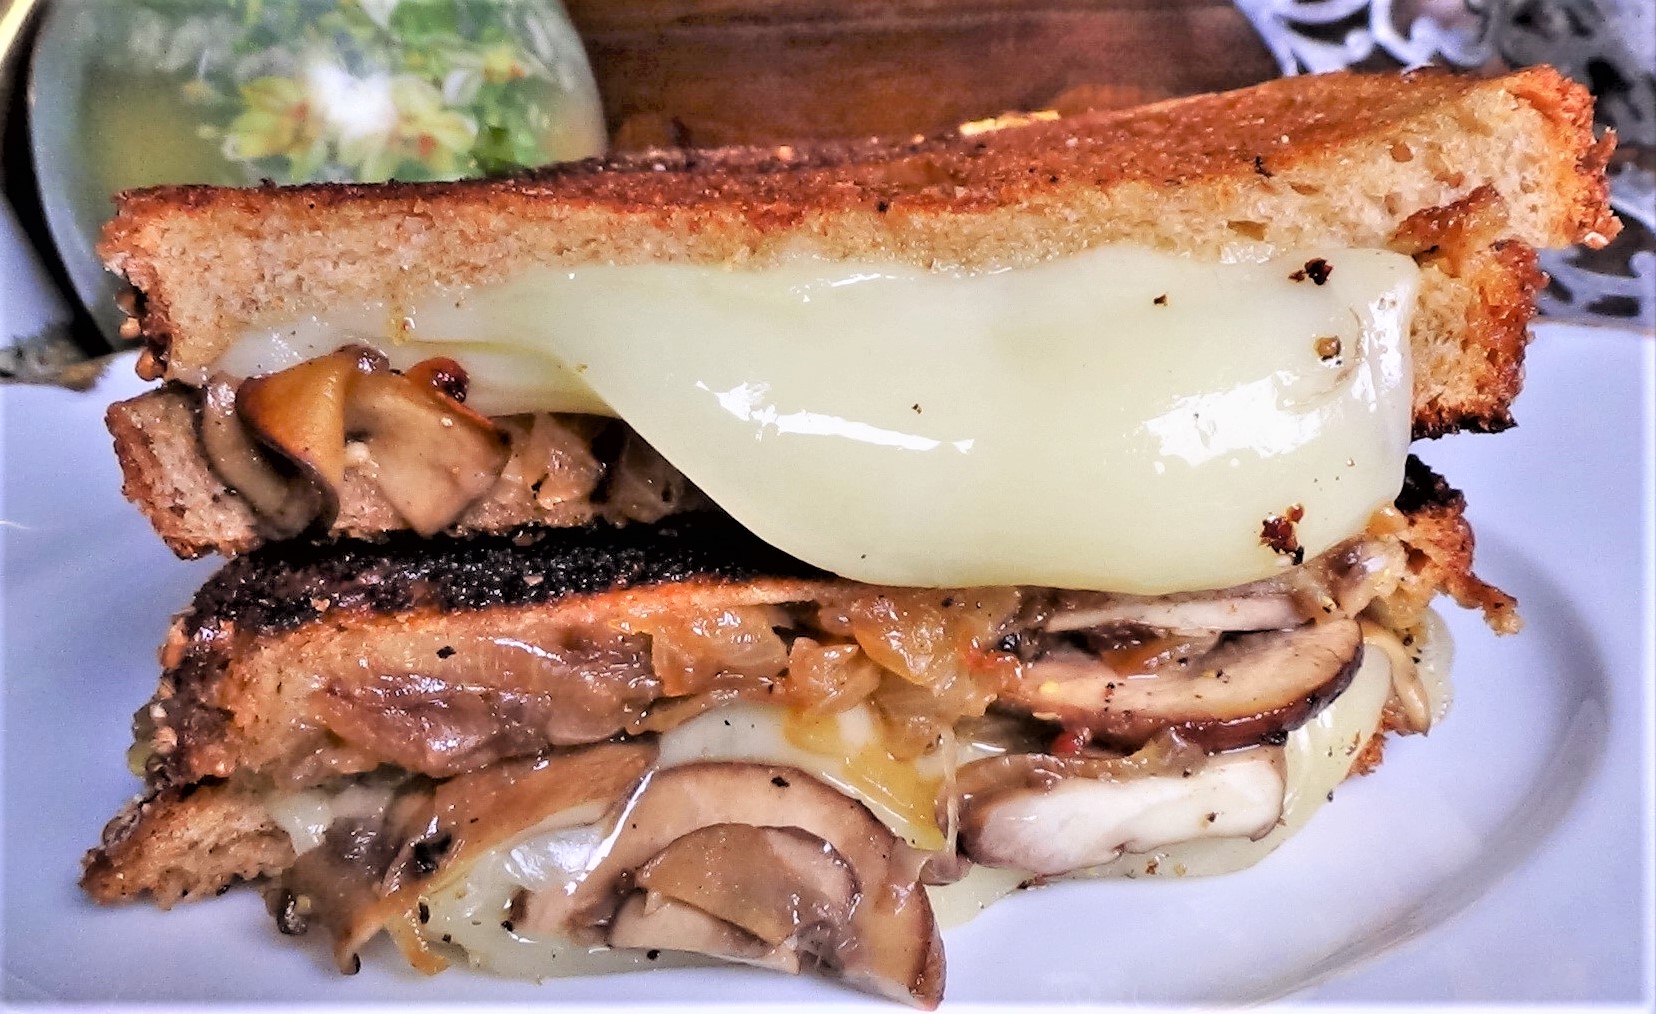 Mushroom, Swiss & Caramelized Onion Grilled Cheese